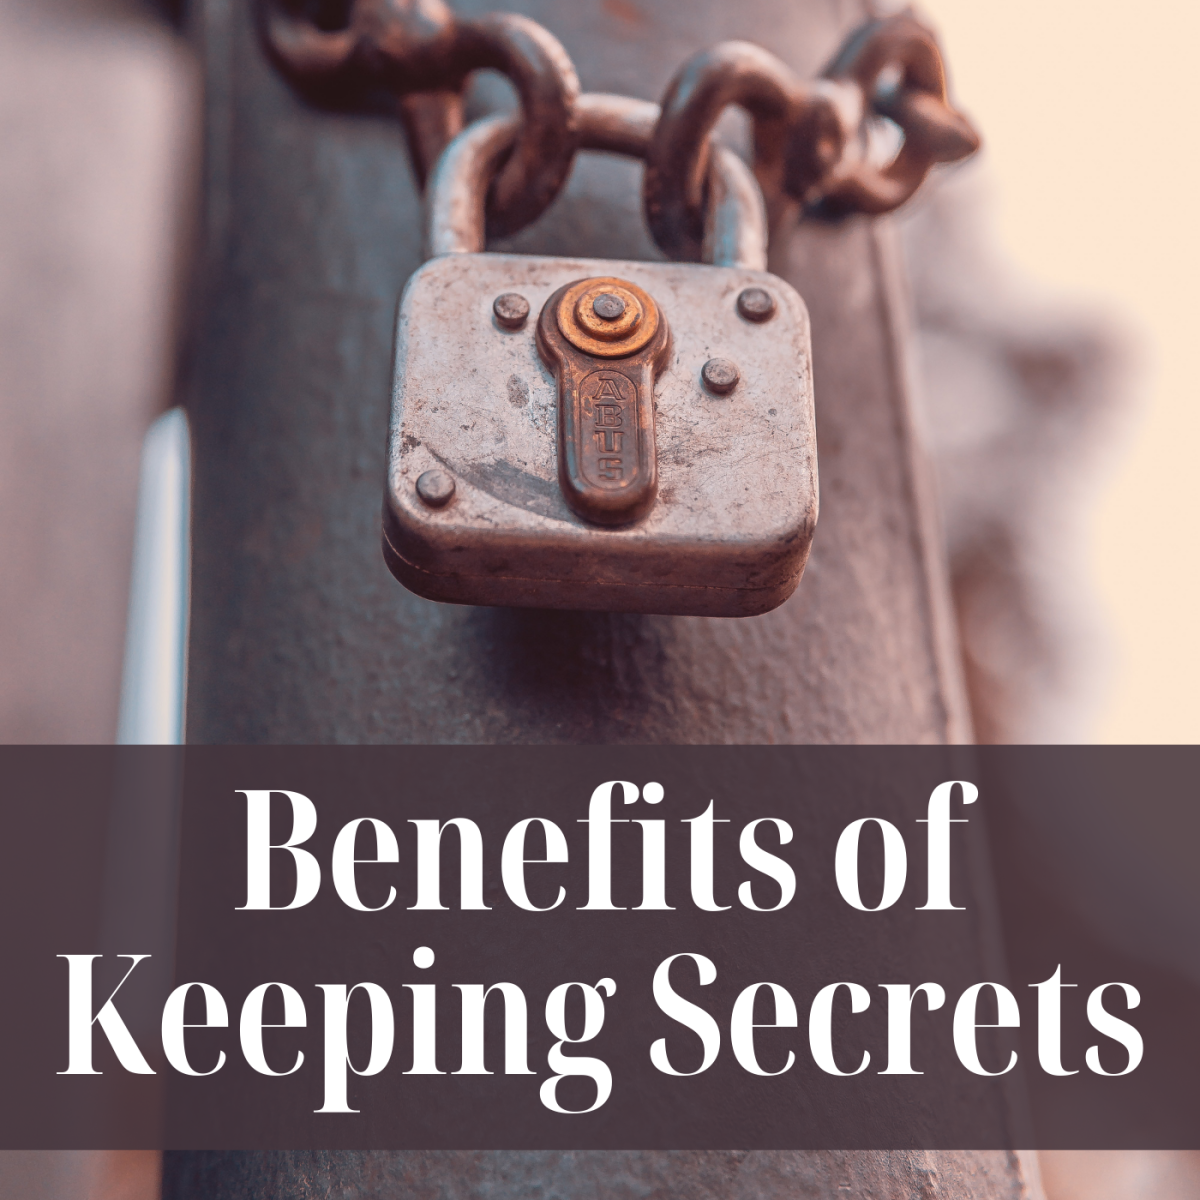 Have you ever broken someone's confidence by telling their secrets? Discover some of the benefits of keeping a secret.